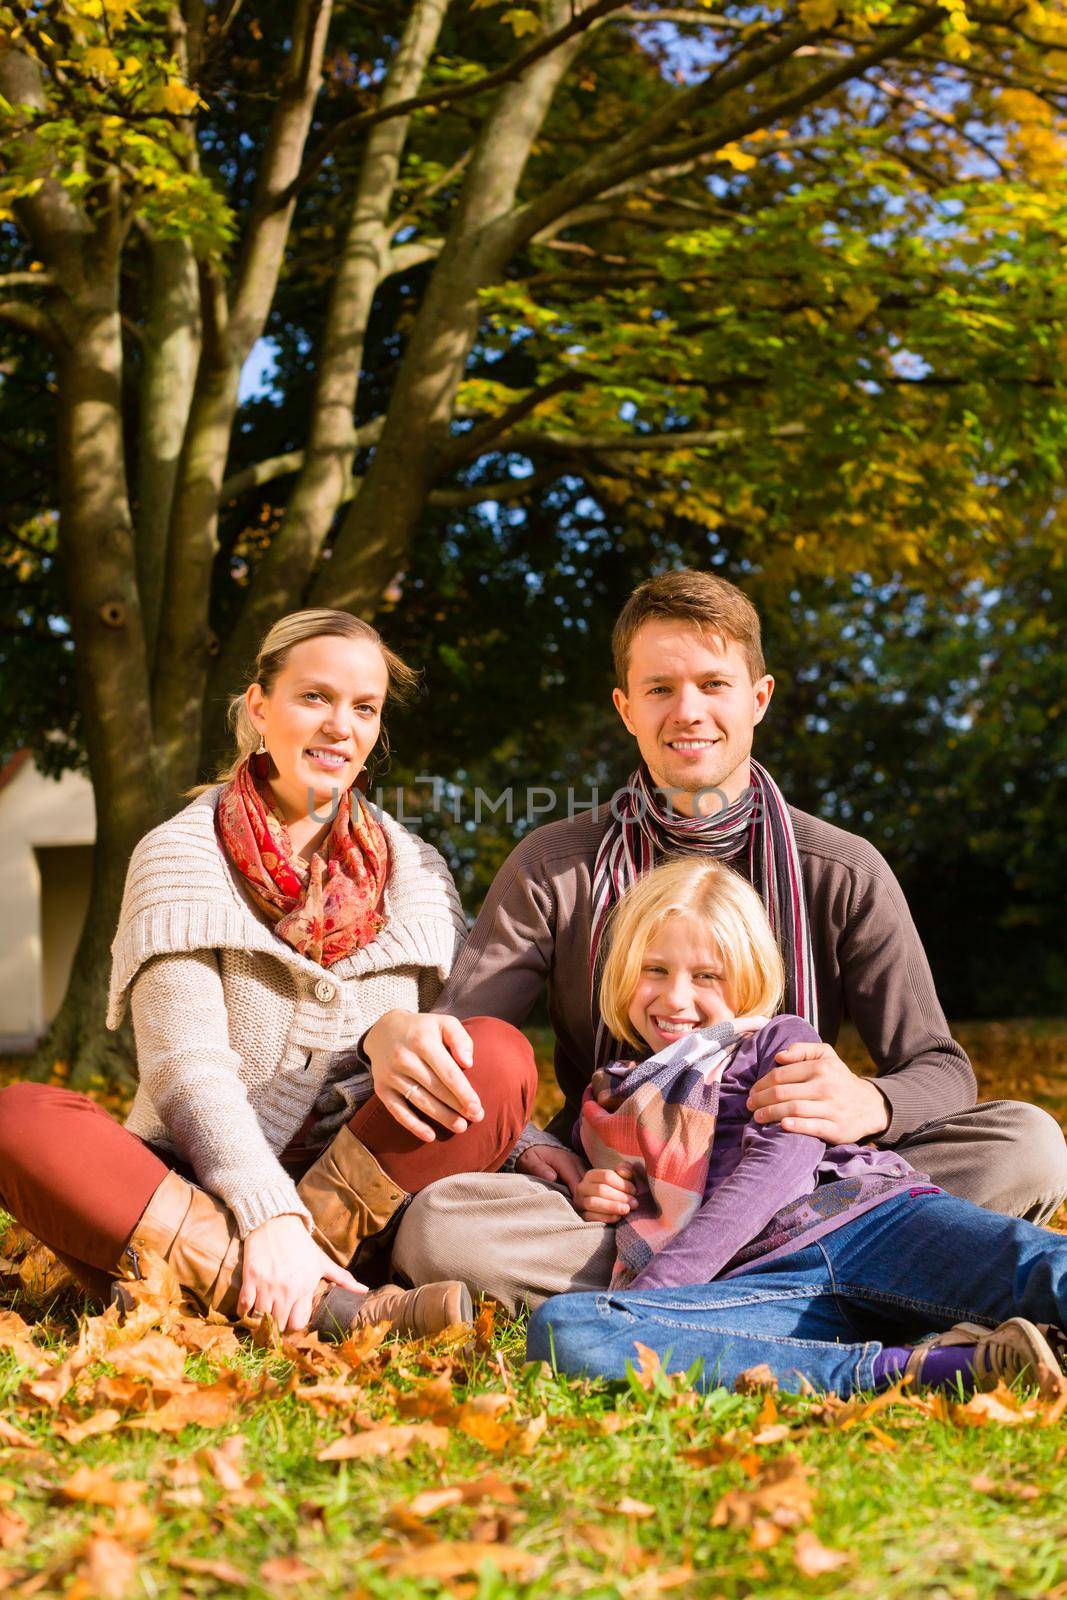 Happy family, Mother, father and daughter or child sitting outdoor on meadow with colorful leaves and under the trees in autumn or fall